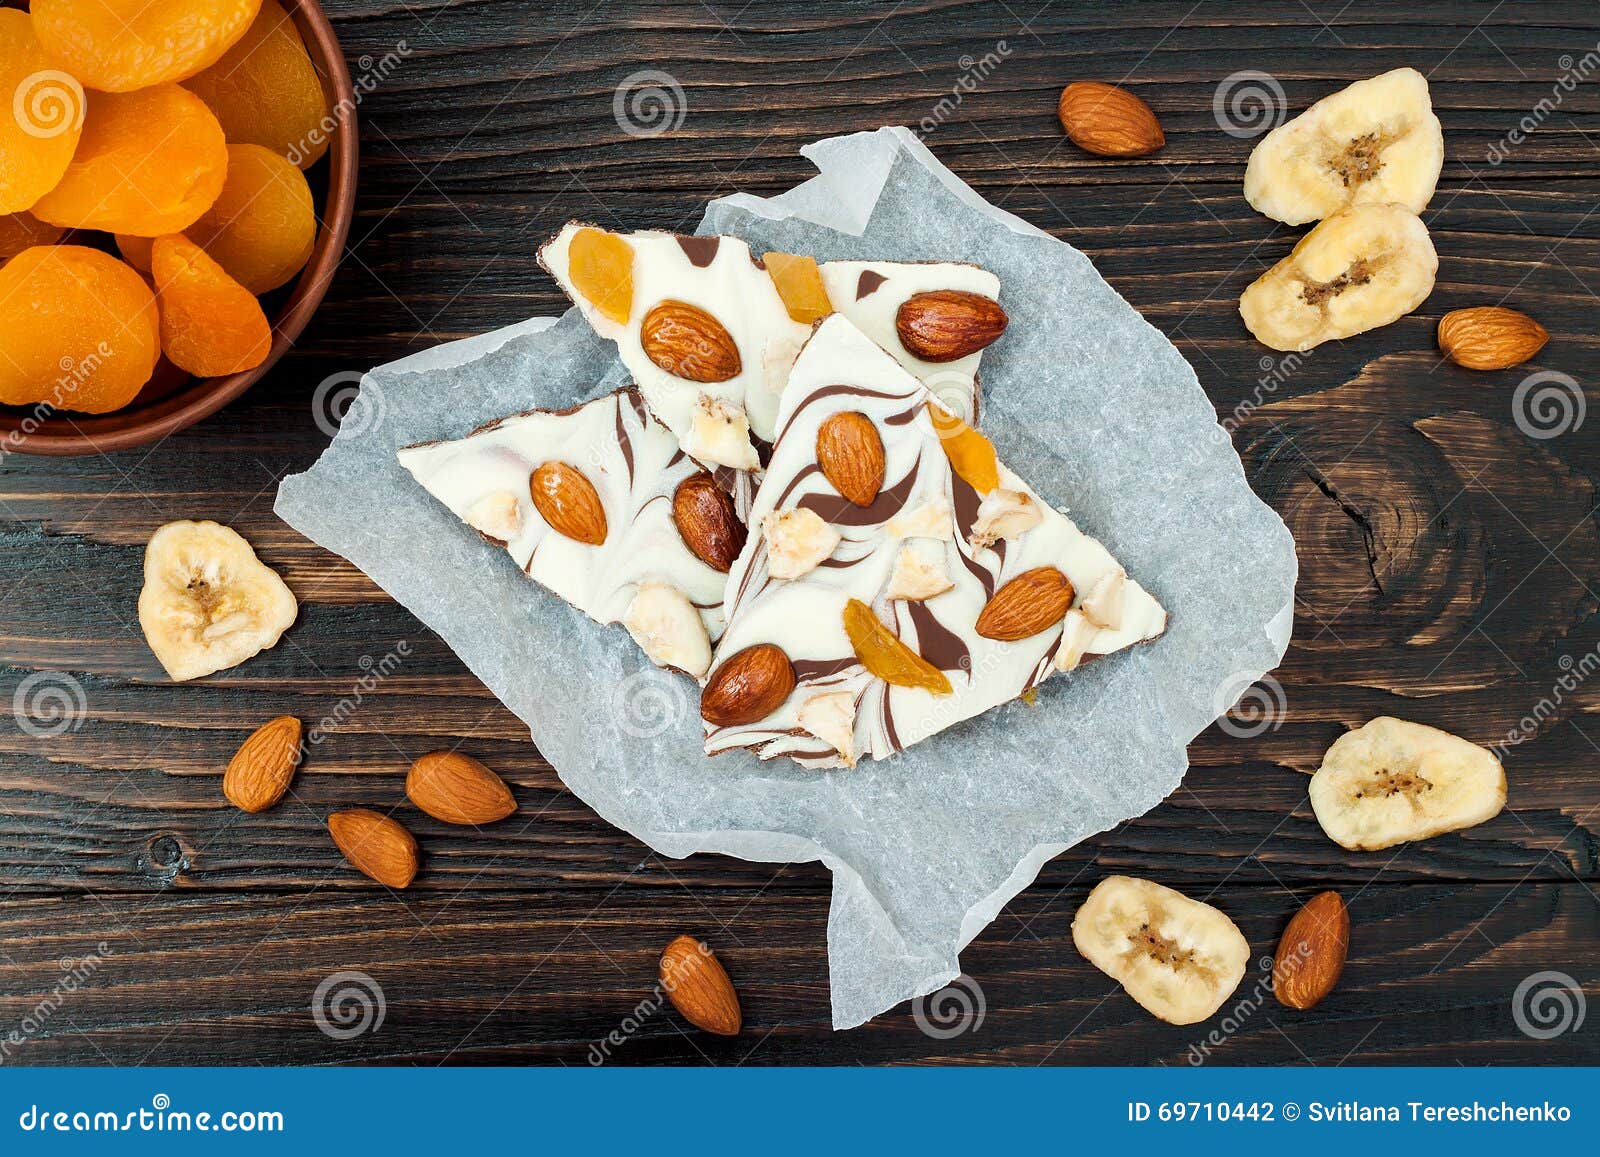 holiday chocolate bark with dried fruits and nuts on a dark wood background. top view. dessert recipe for judaic holiday tu bishva